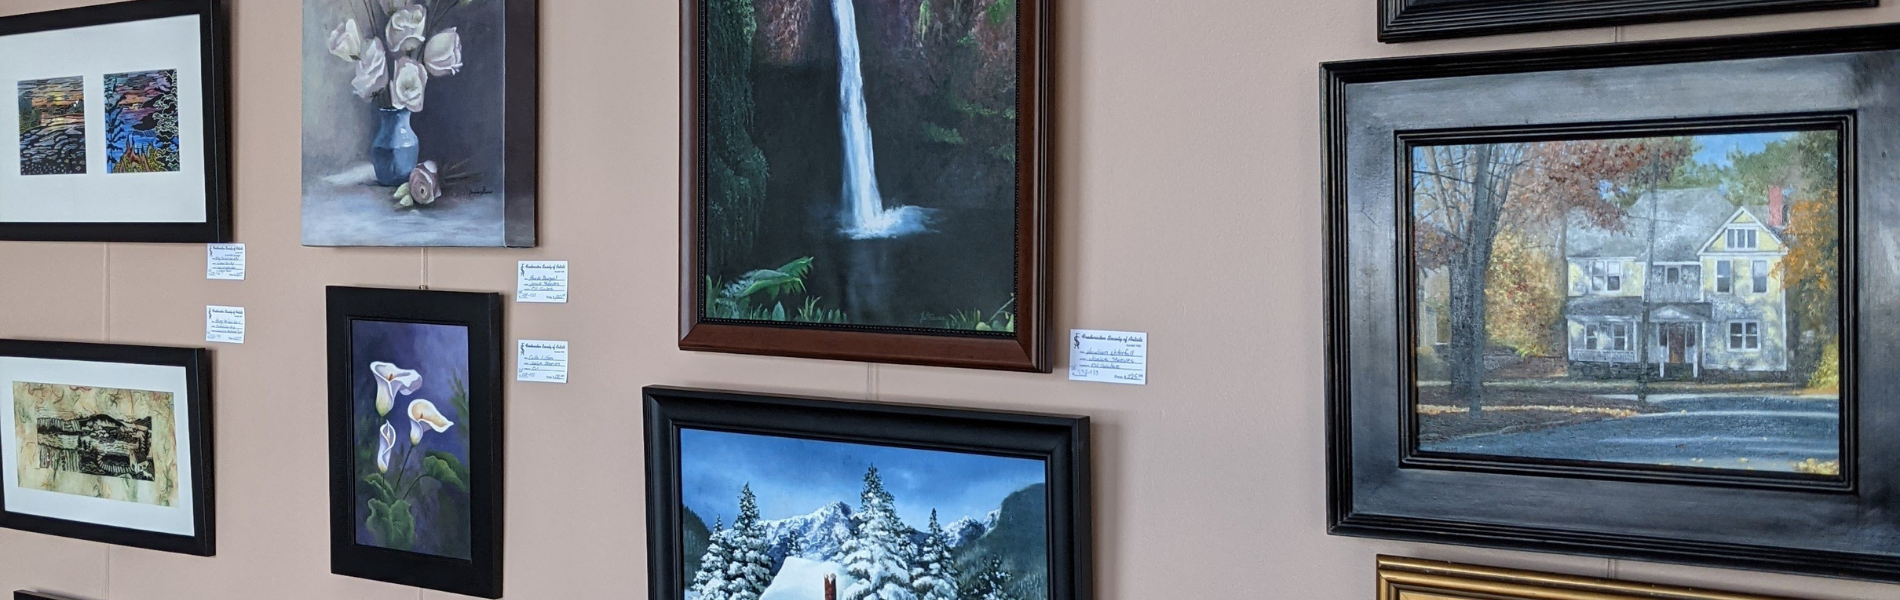 A display wall of multiple art works hanging at the Playhouse